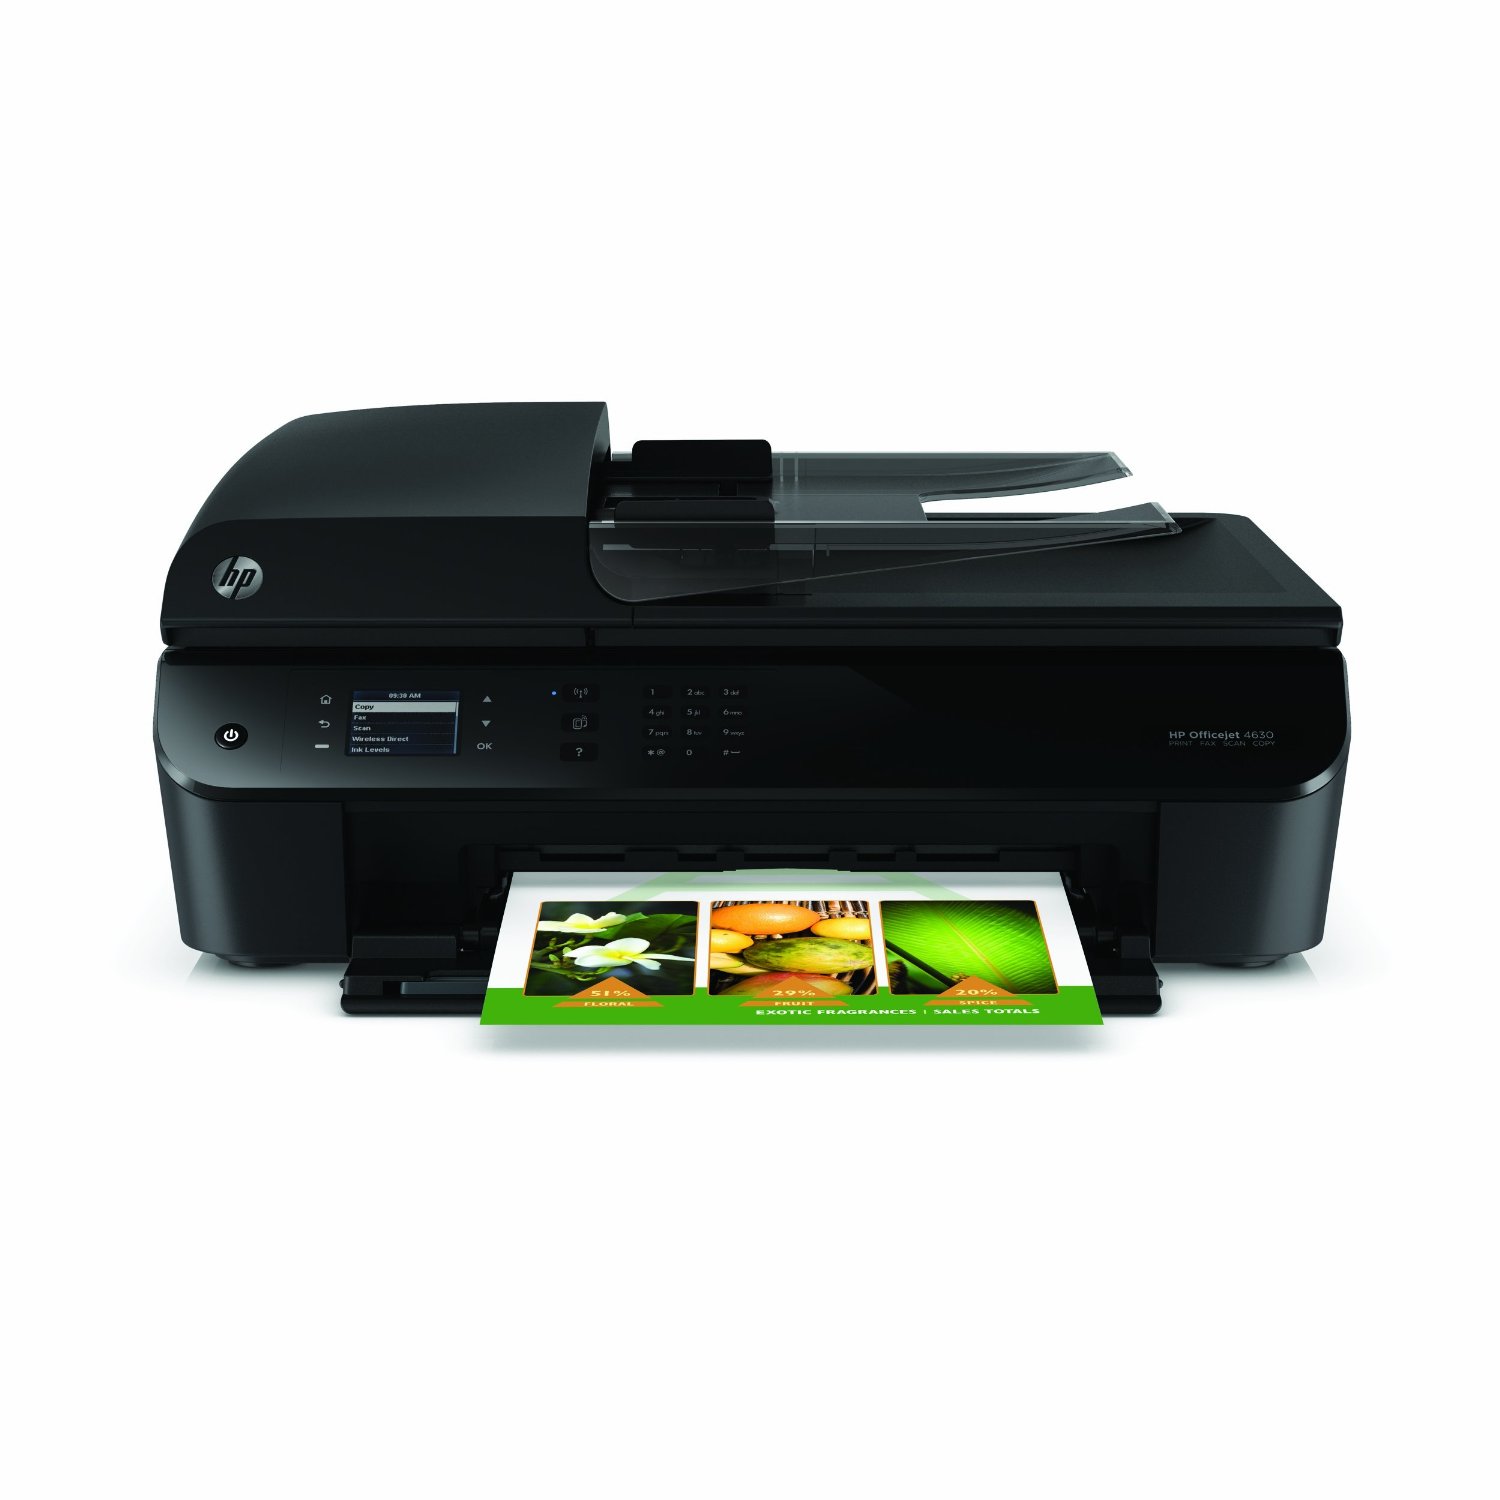 sams club worlds smallest all in one printer scanner fax hp